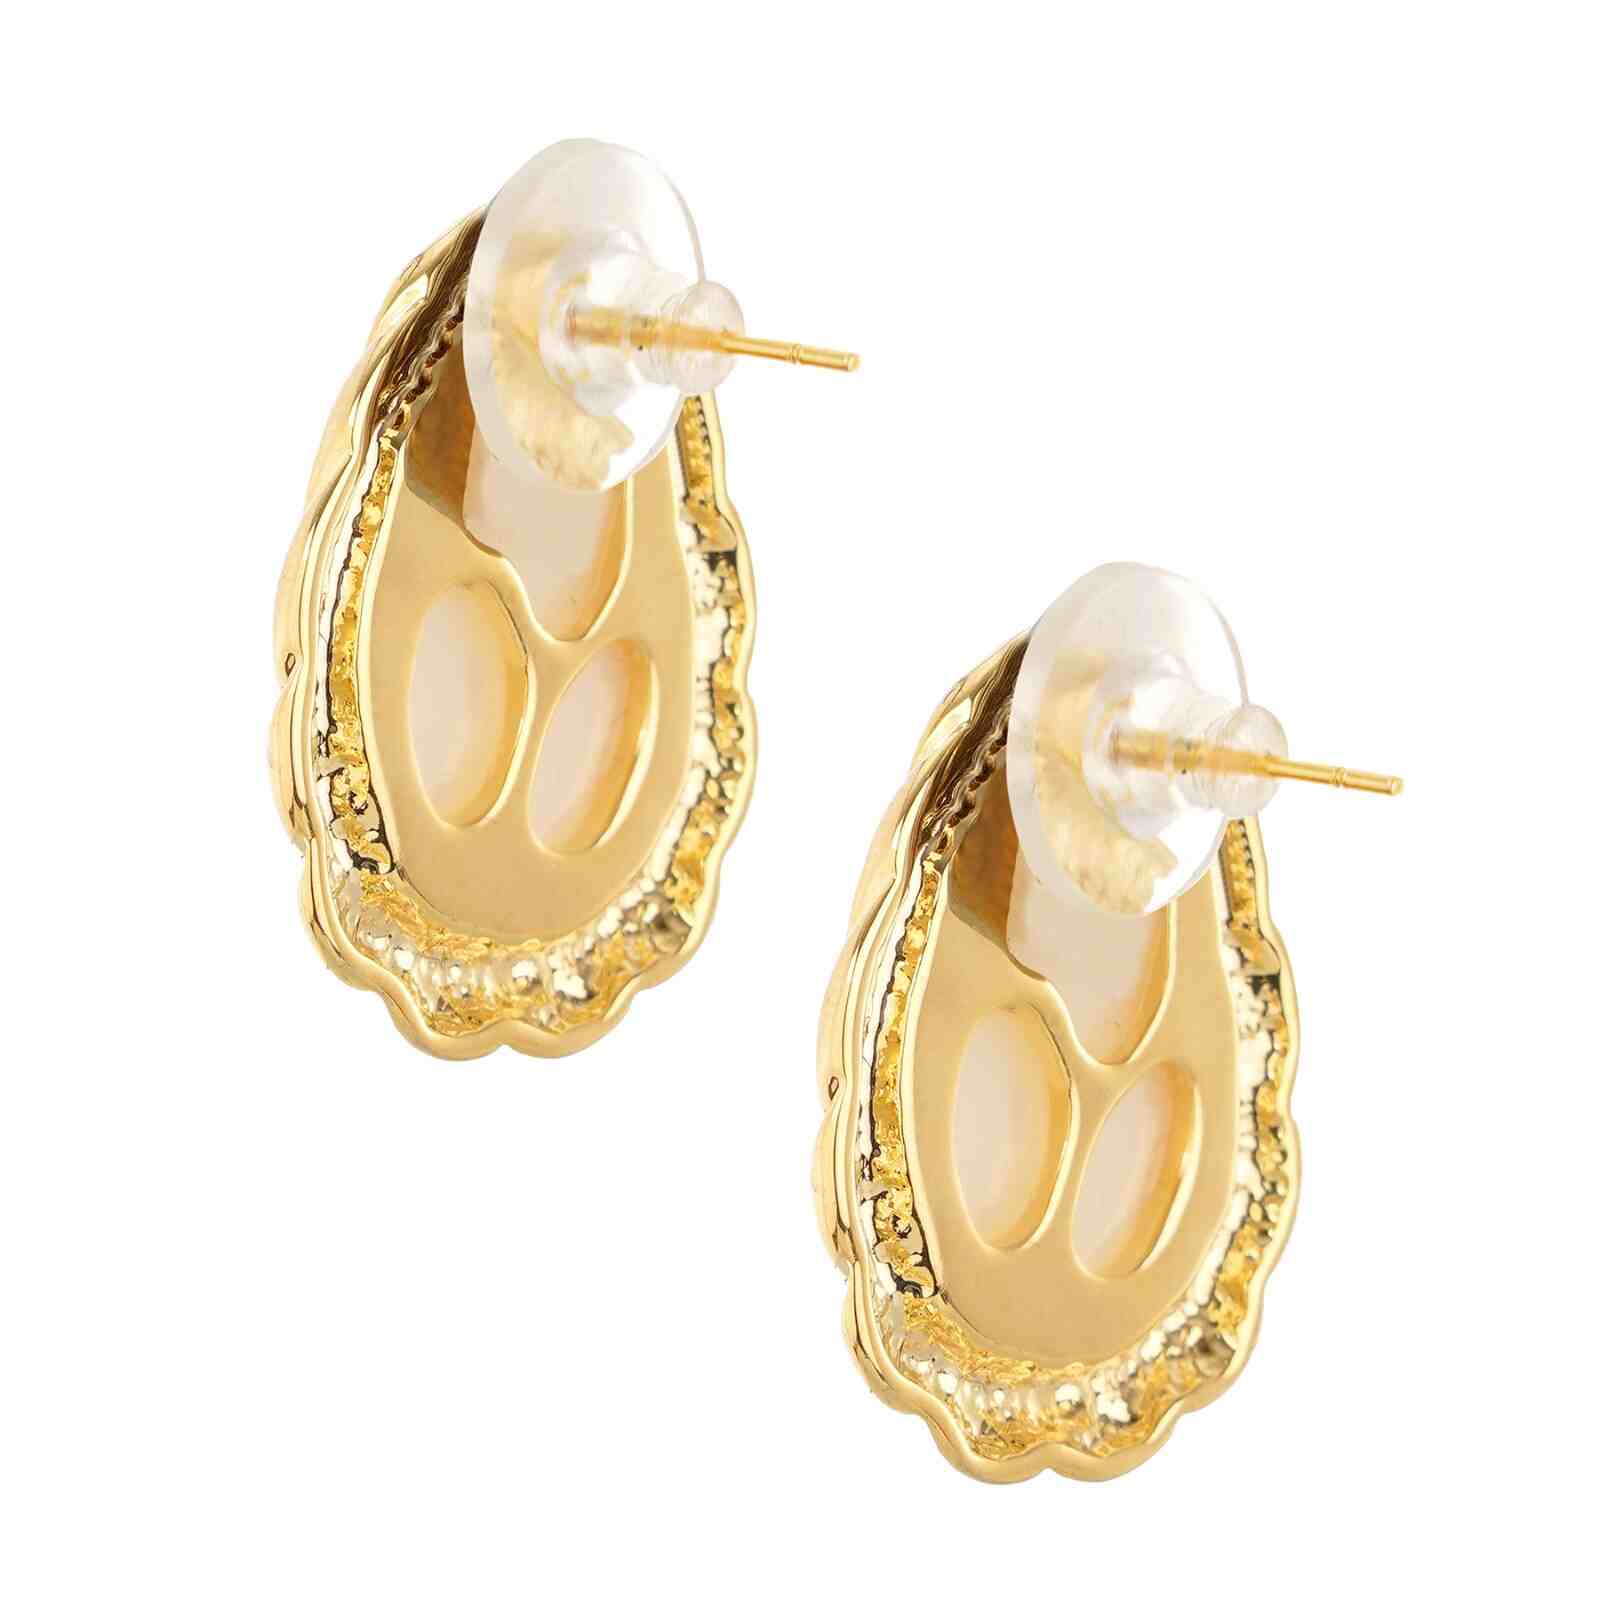 Buy Tiny Pearl Studs 14K Solid Gold Earrings White Pearl Online in India   Etsy